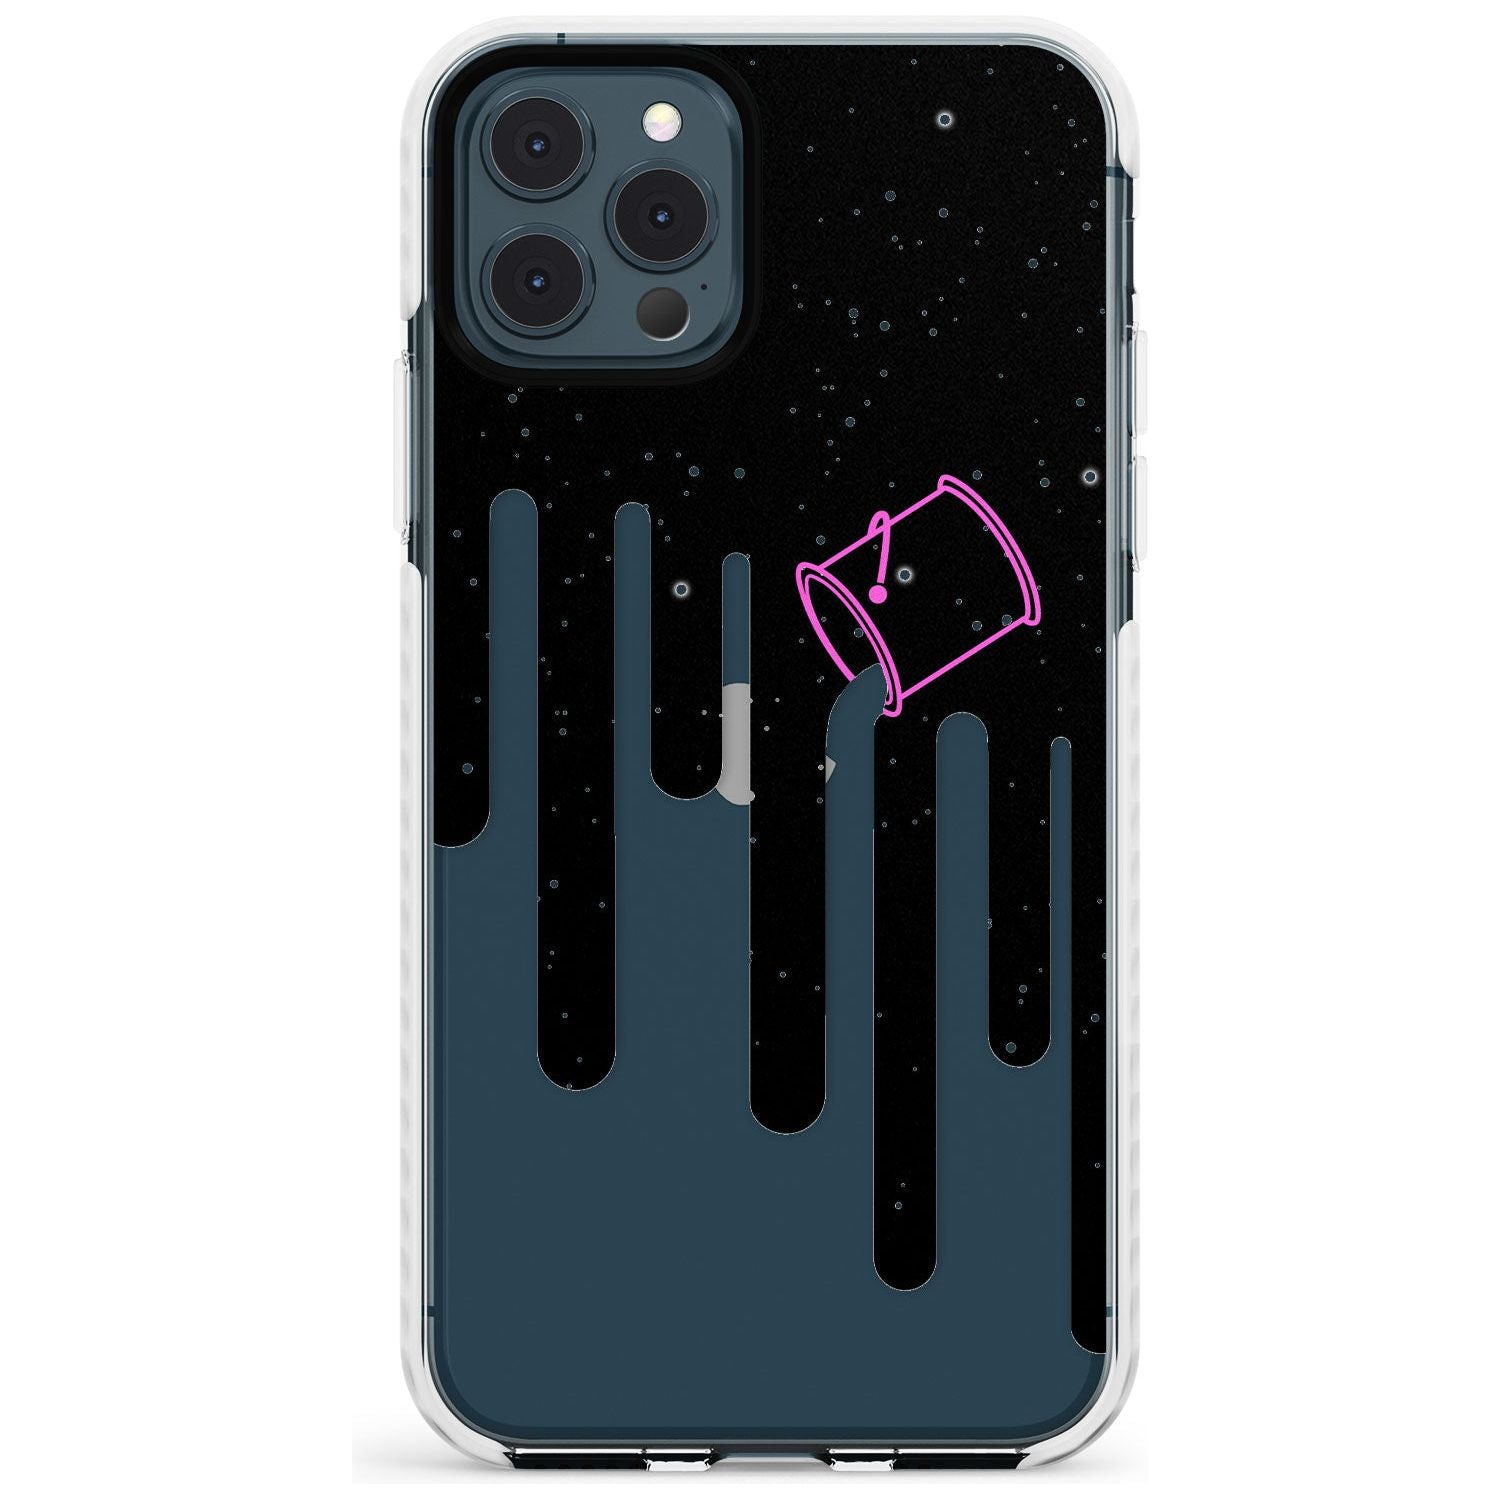 Space Bucket Slim TPU Phone Case for iPhone 11 Pro Max